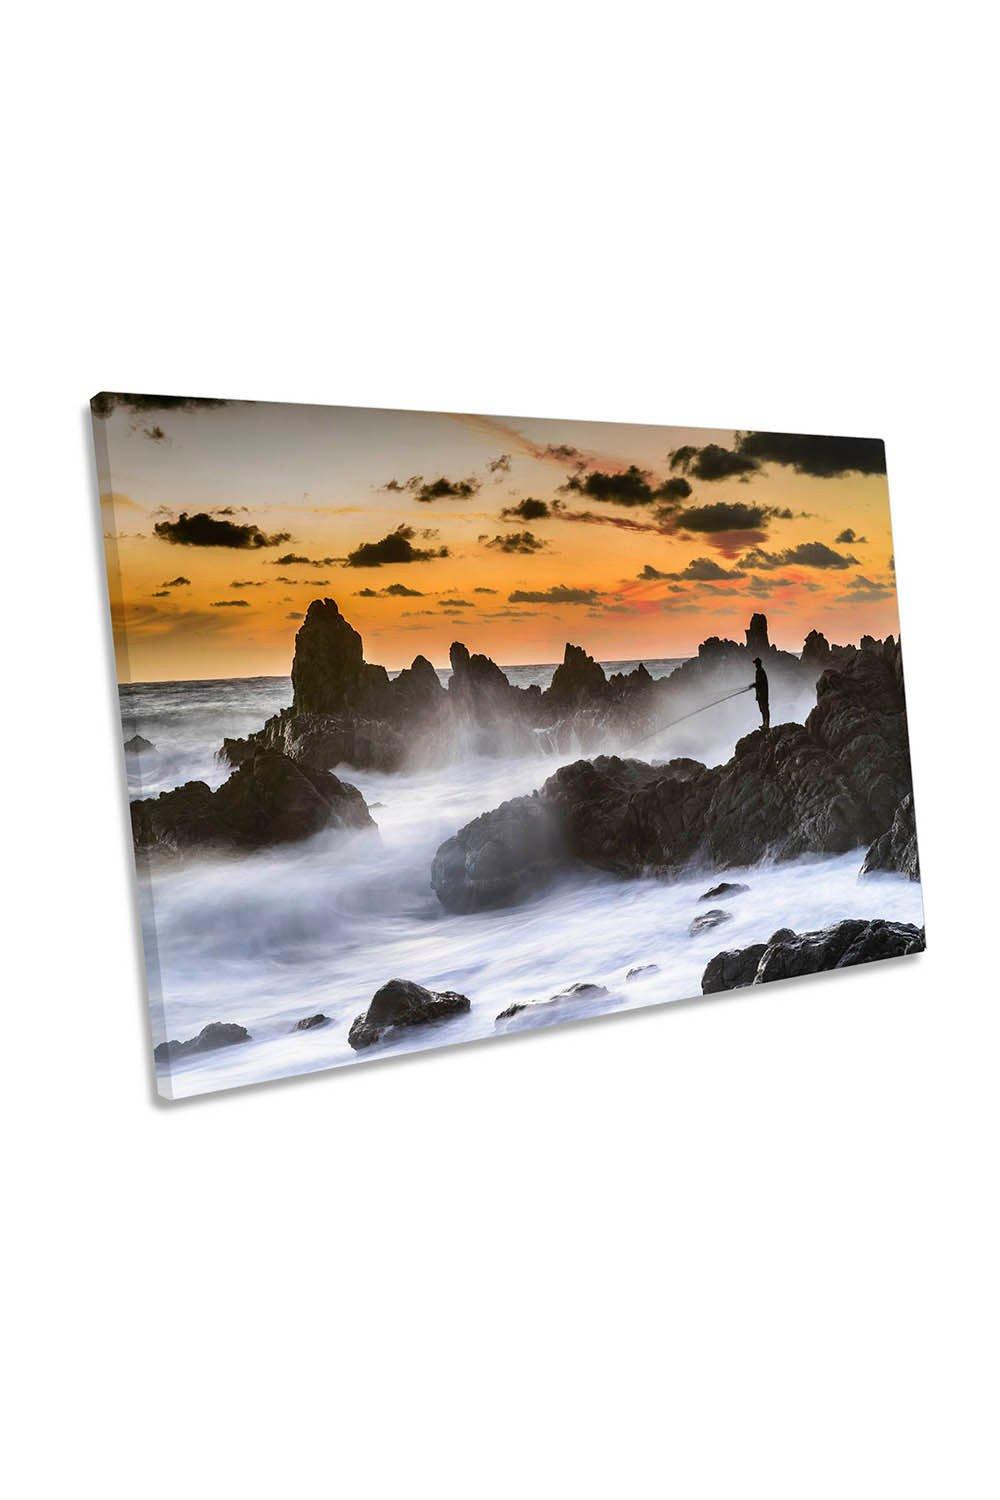 The Sunset Fisherman Seascape Canvas Wall Art Picture Print